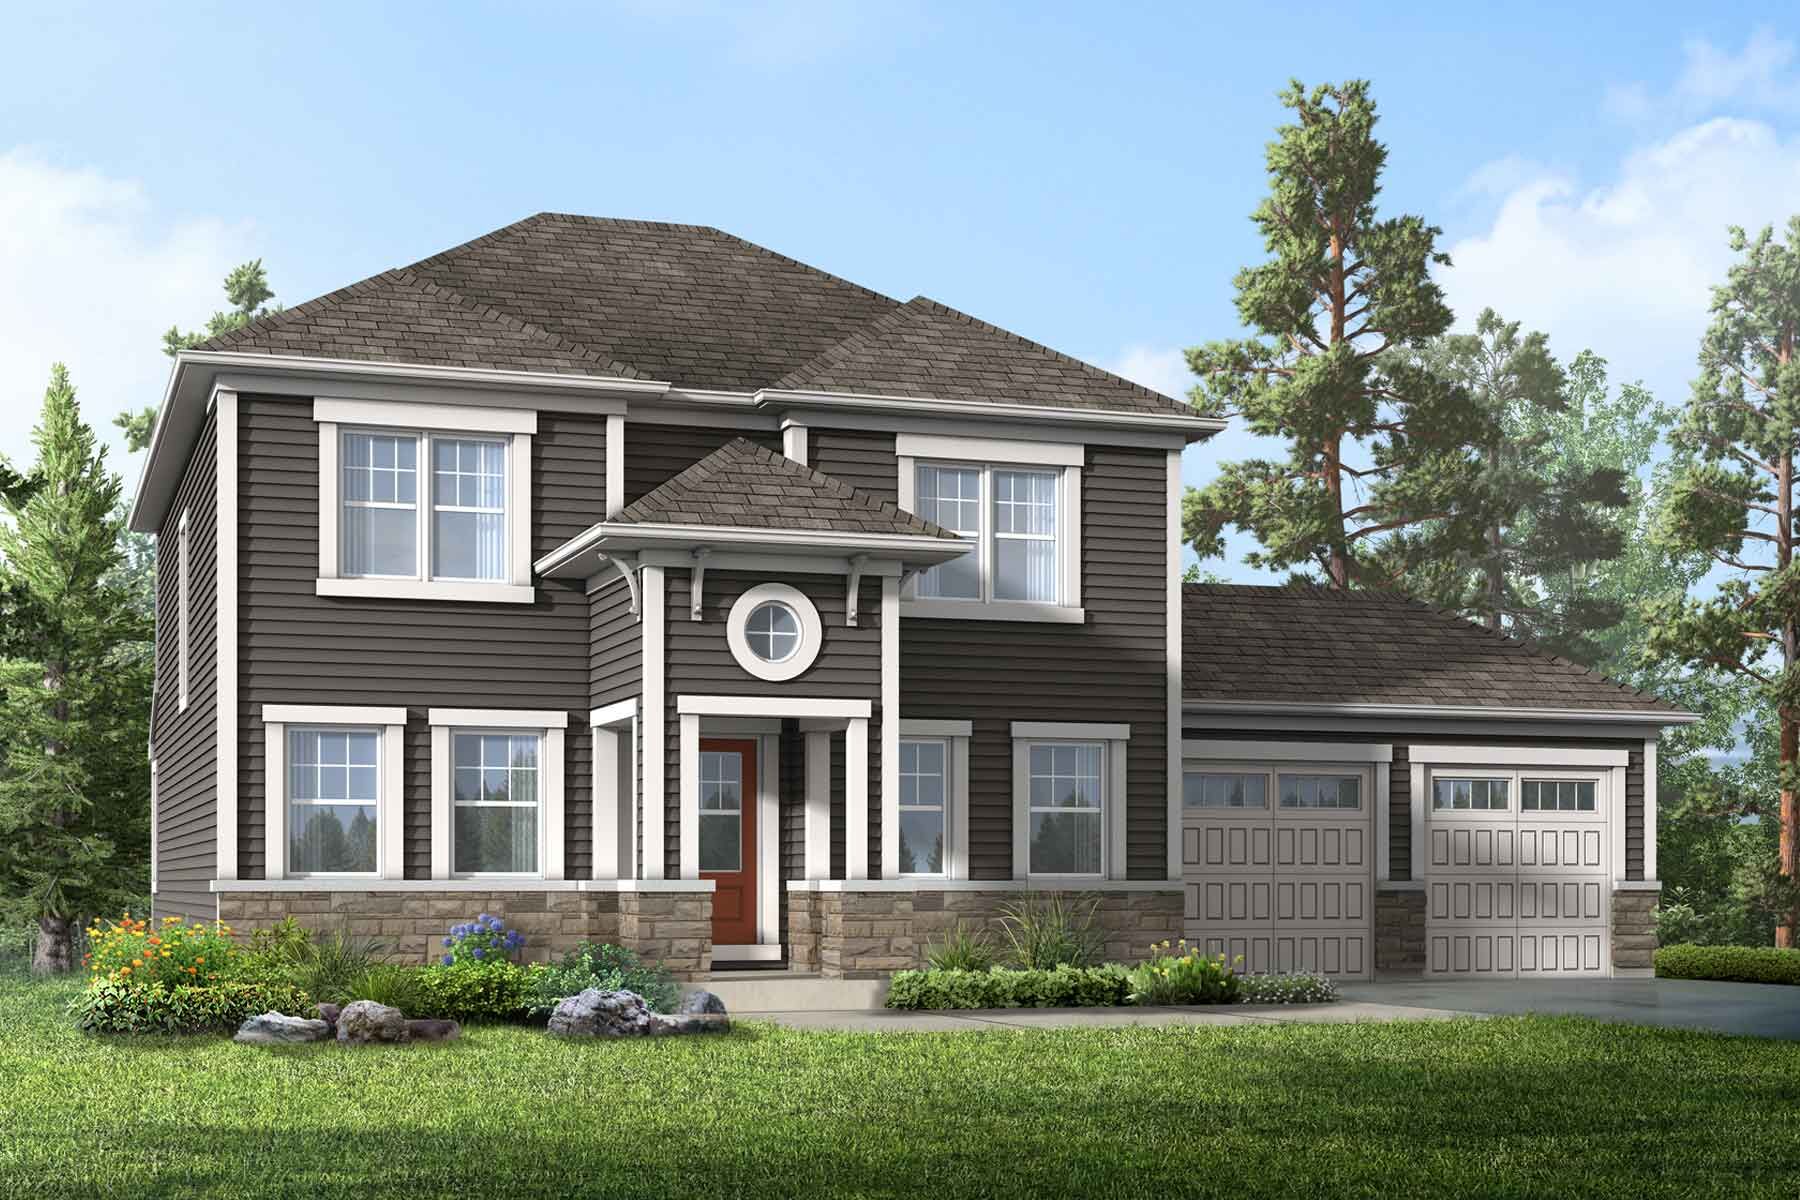 A Costal style elevation with double car garage and a covered porch with a circle window above it. 